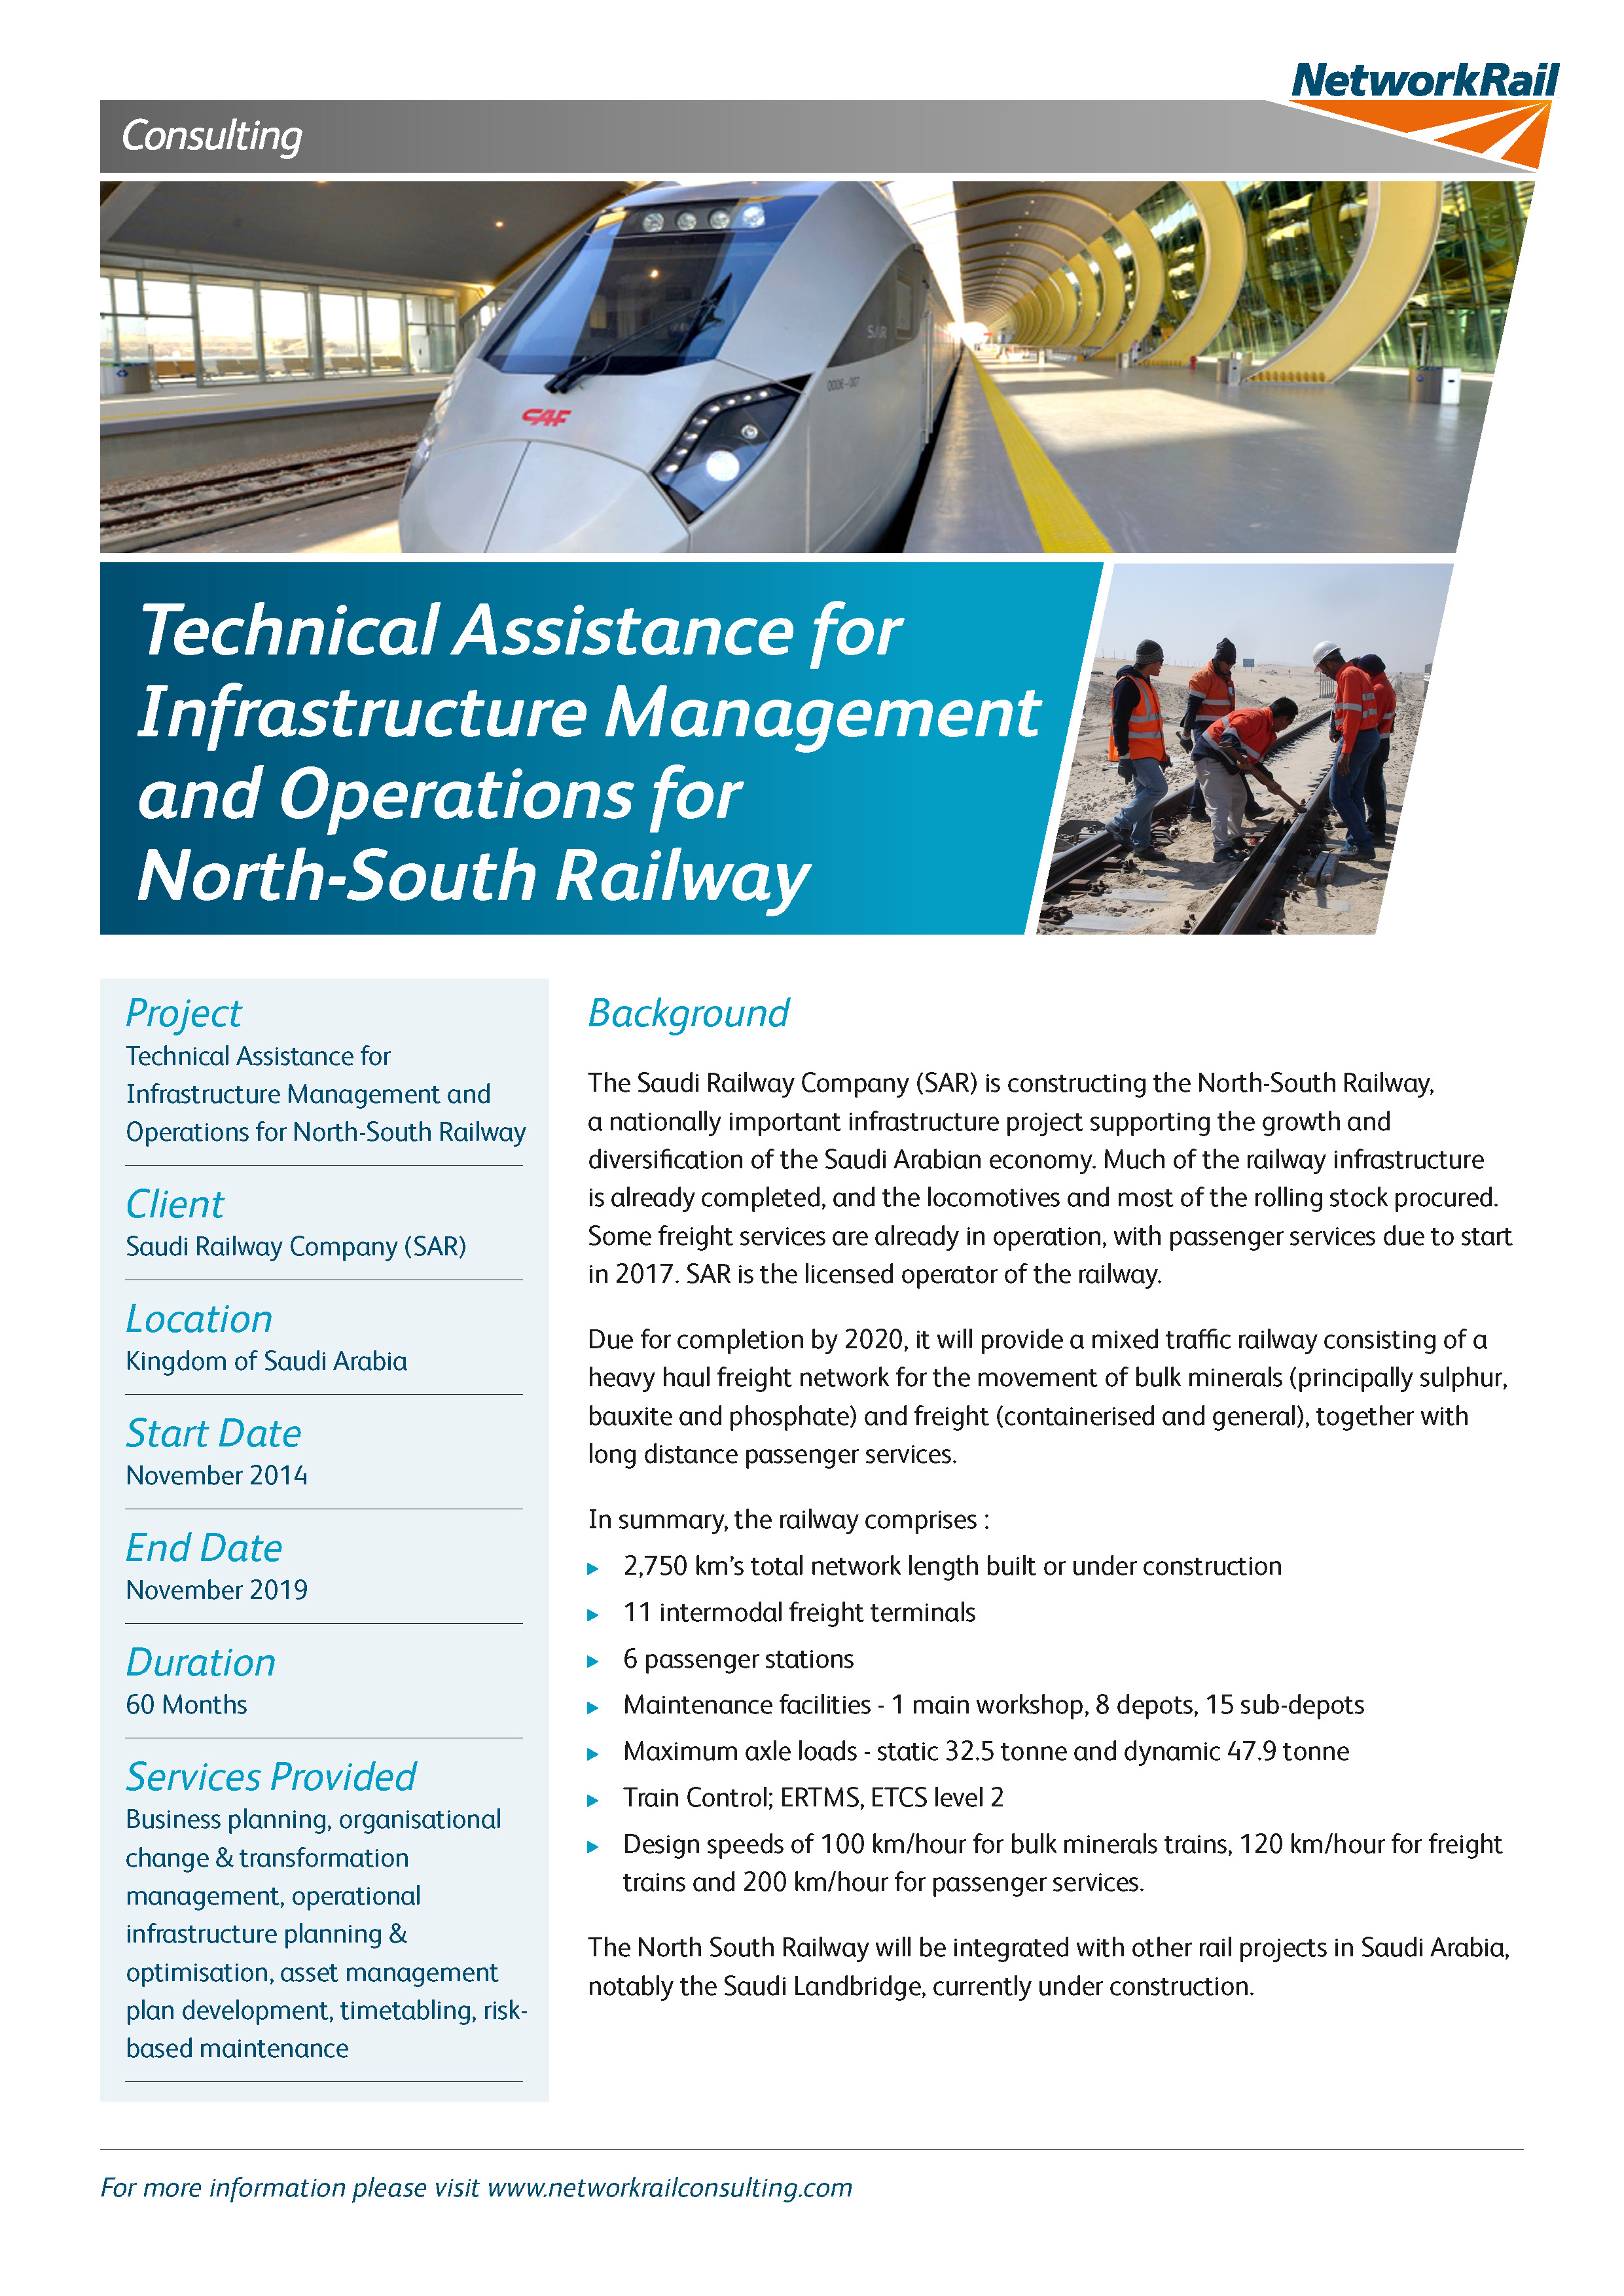 Technical Assistance for Infrastructure Management and Operations for North South Railway Page 1